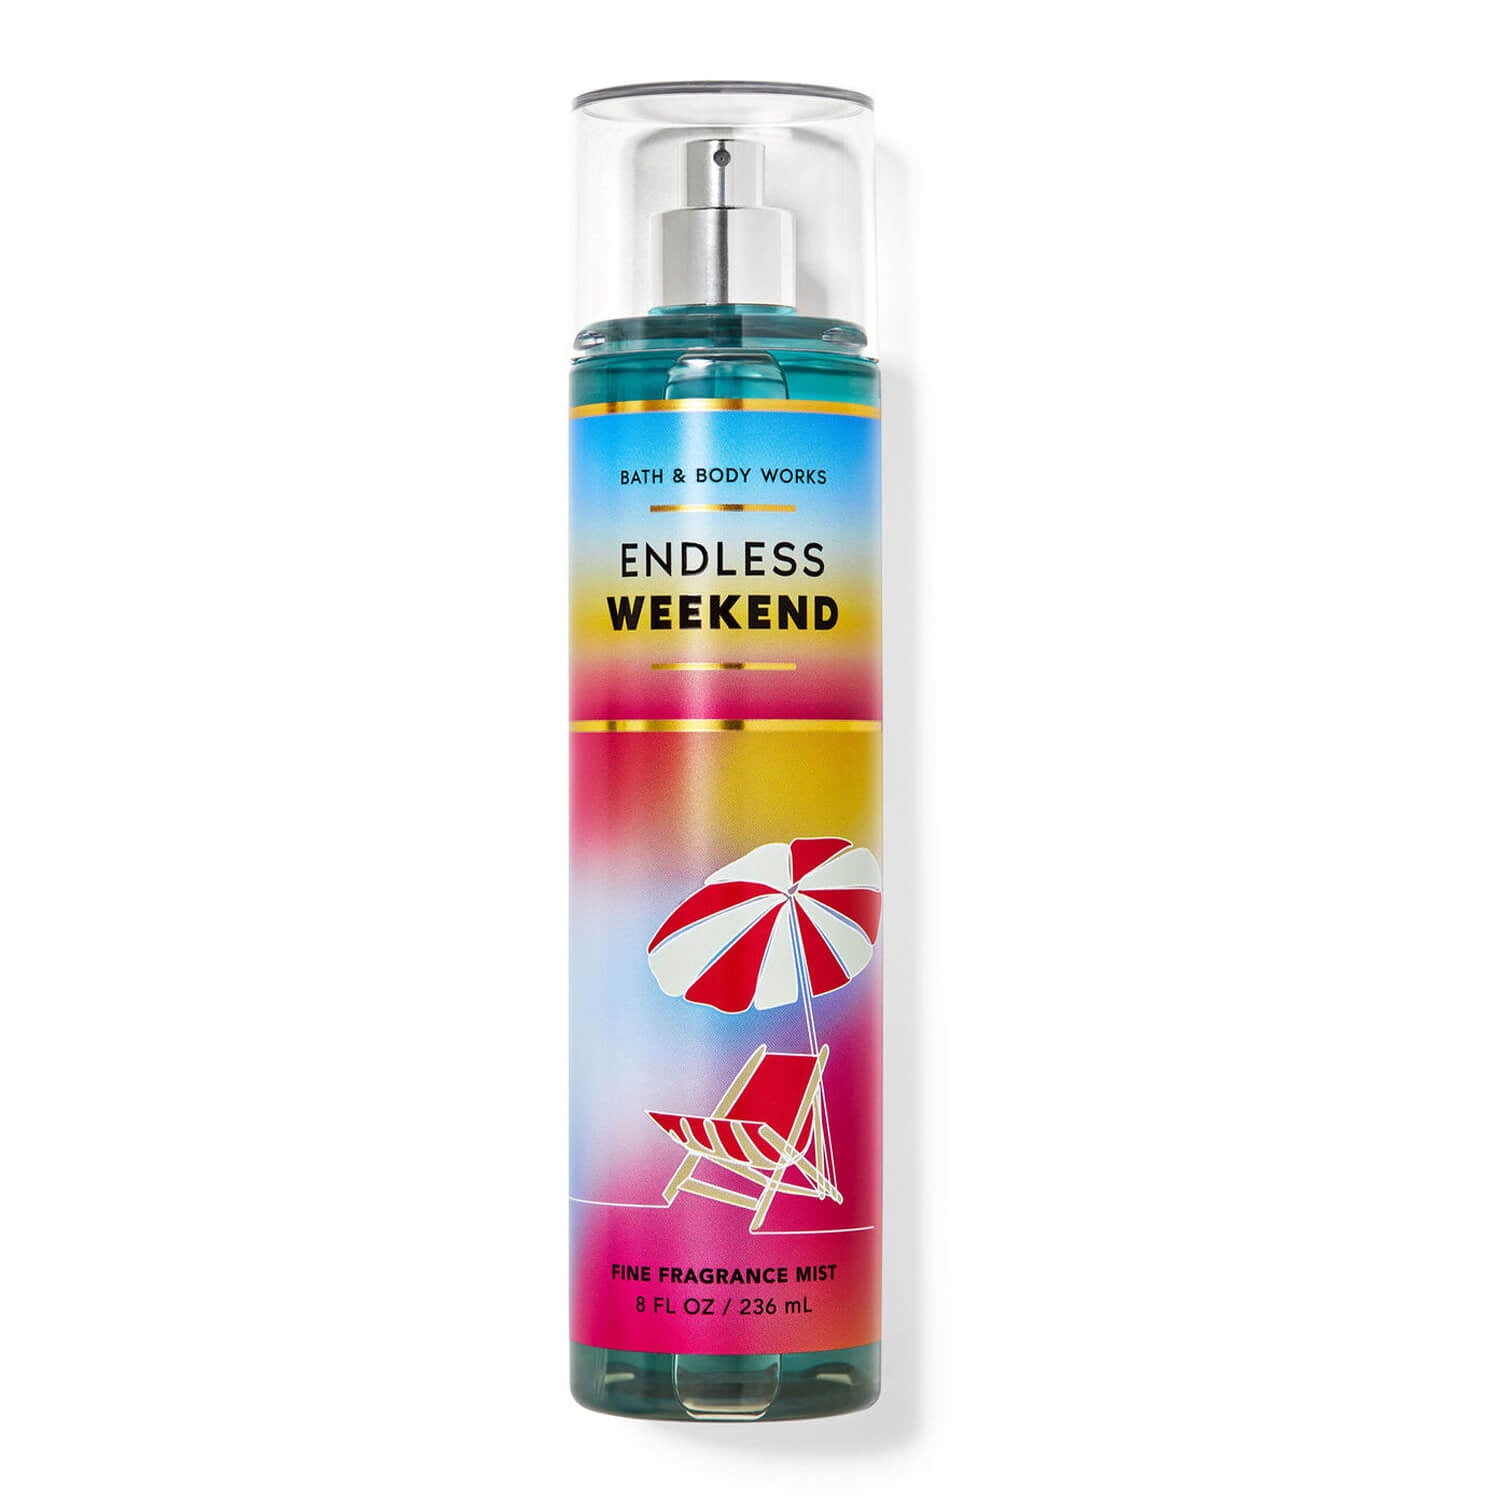 shop bath and body works body mist in endless weekend fragrance available at Heygirl.pk for delivery in Pakistan